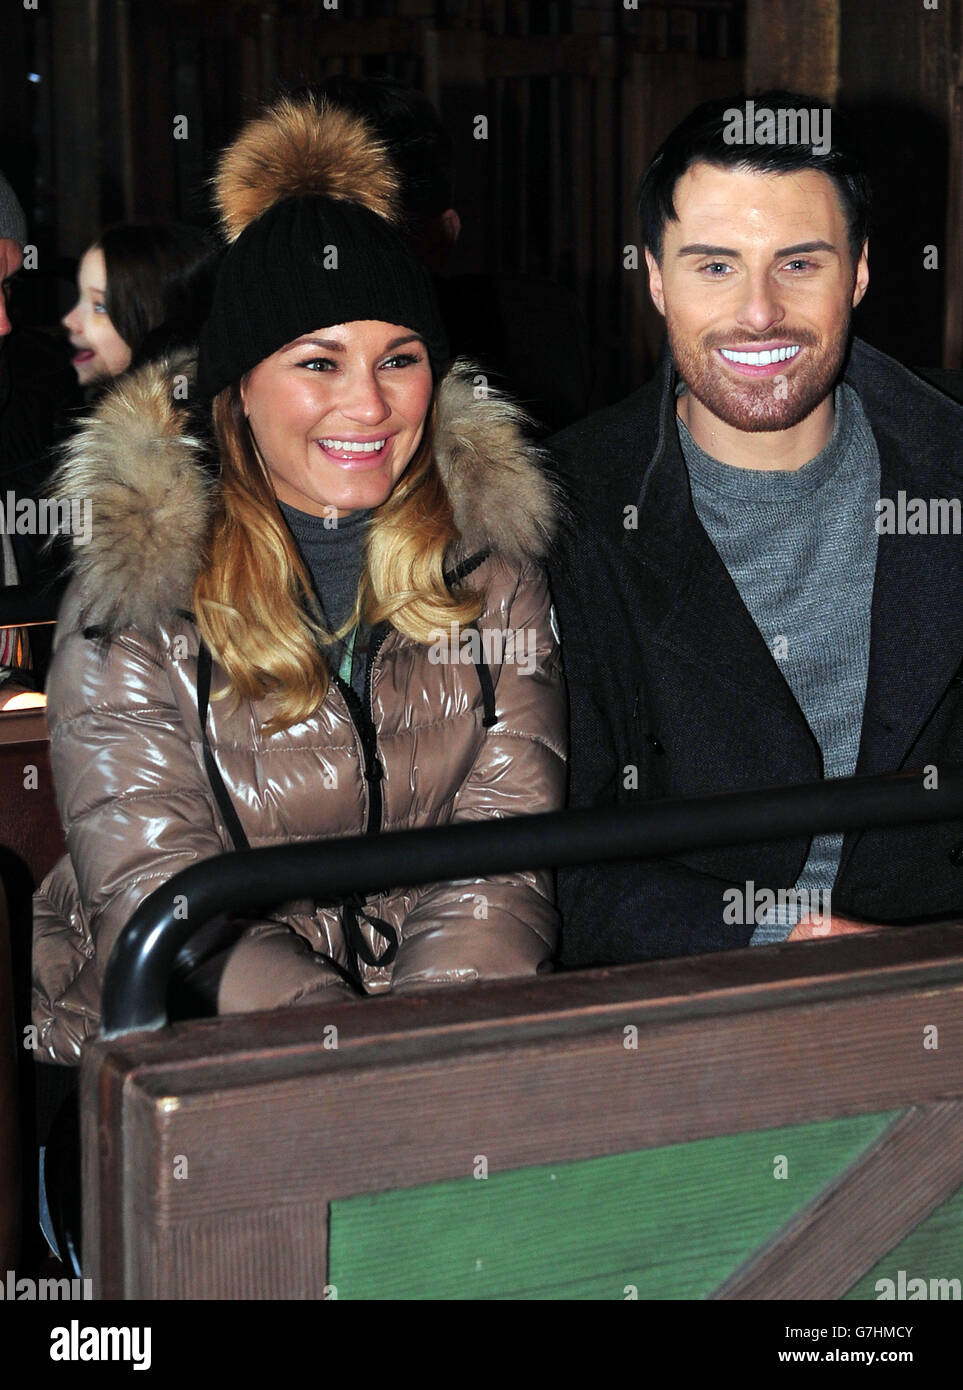 Sam Faiers and Rylan Clarke (right) ride Thunder Mountain during the charity trip to Disneyland Paris for under privileged children. PRESS ASSOCIATION Photo. Picture date: Tuesday December 16, 2014. Photo credit should read: Nick Ansell/PA Wire Stock Photo